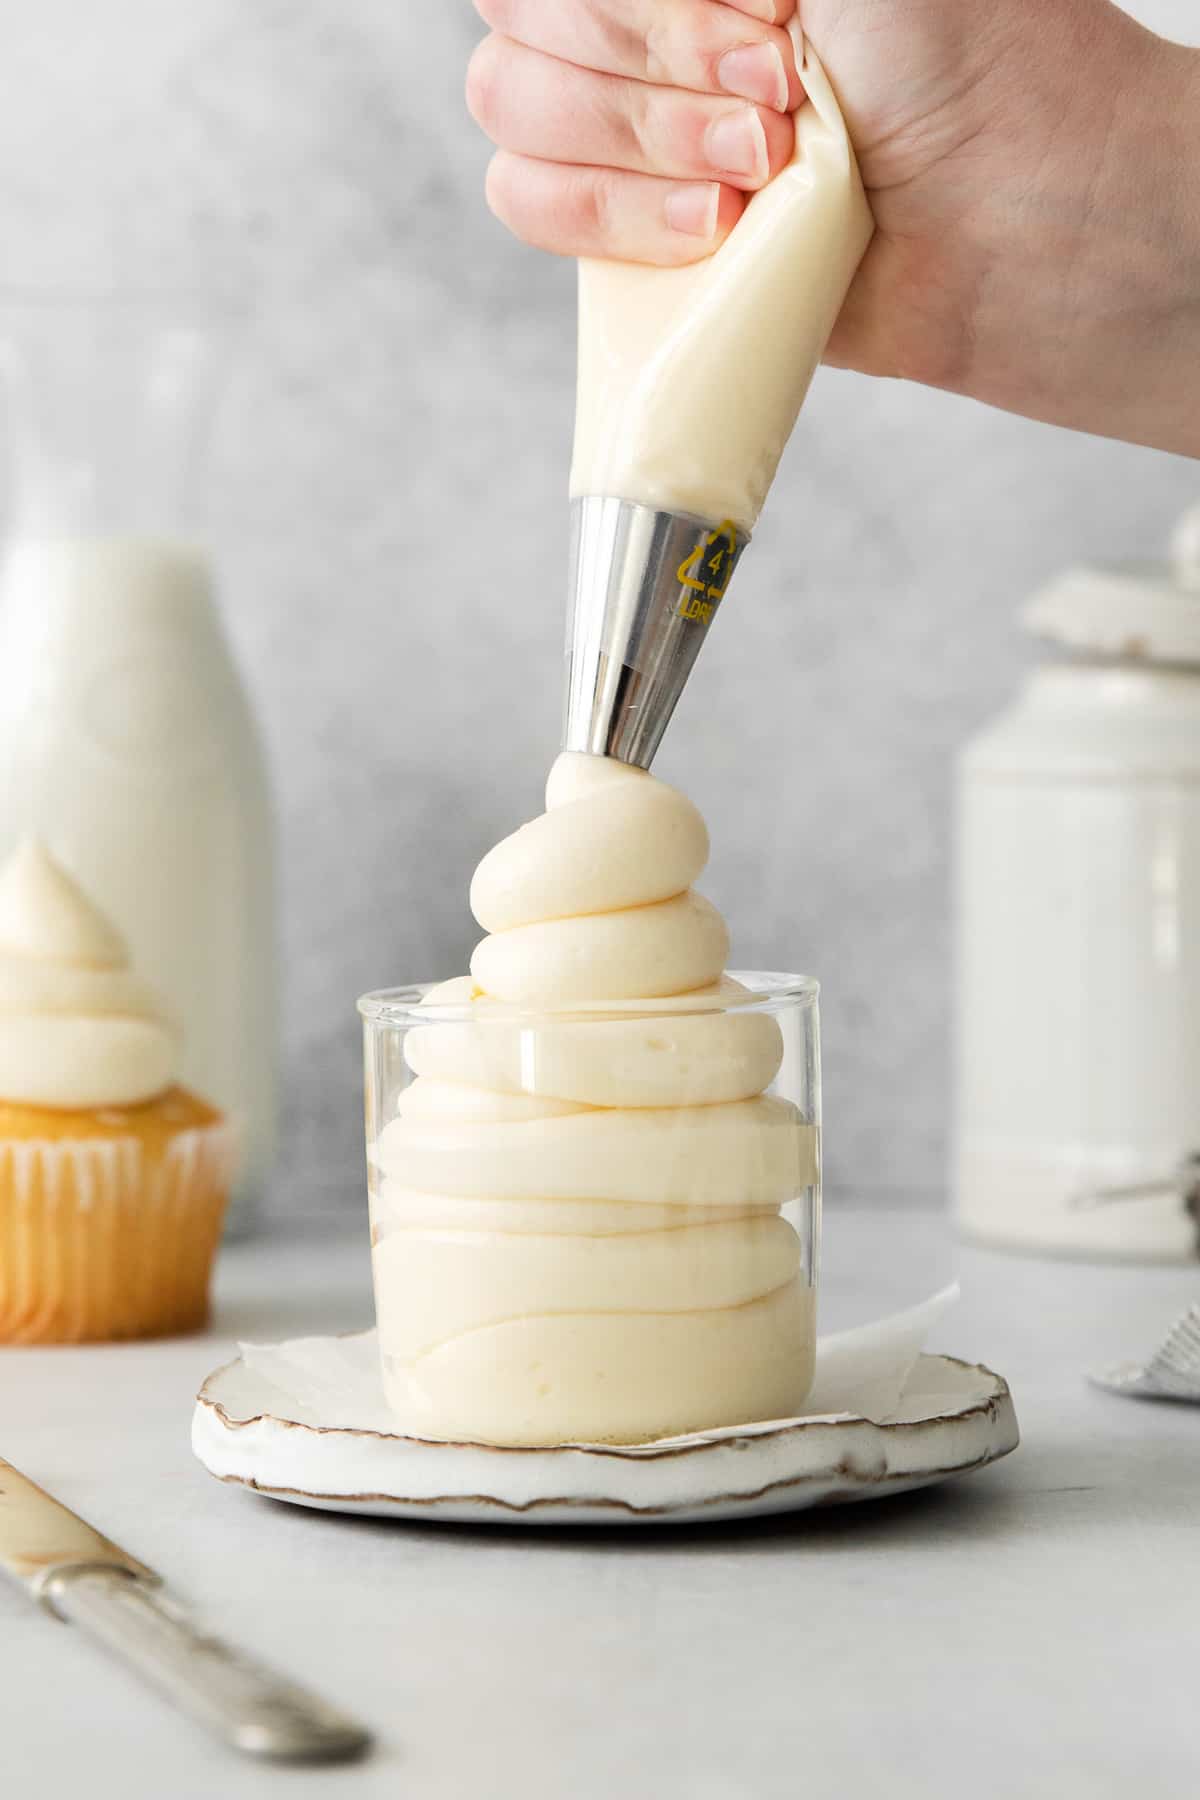 Mascarpone frosting being piped into a glass.